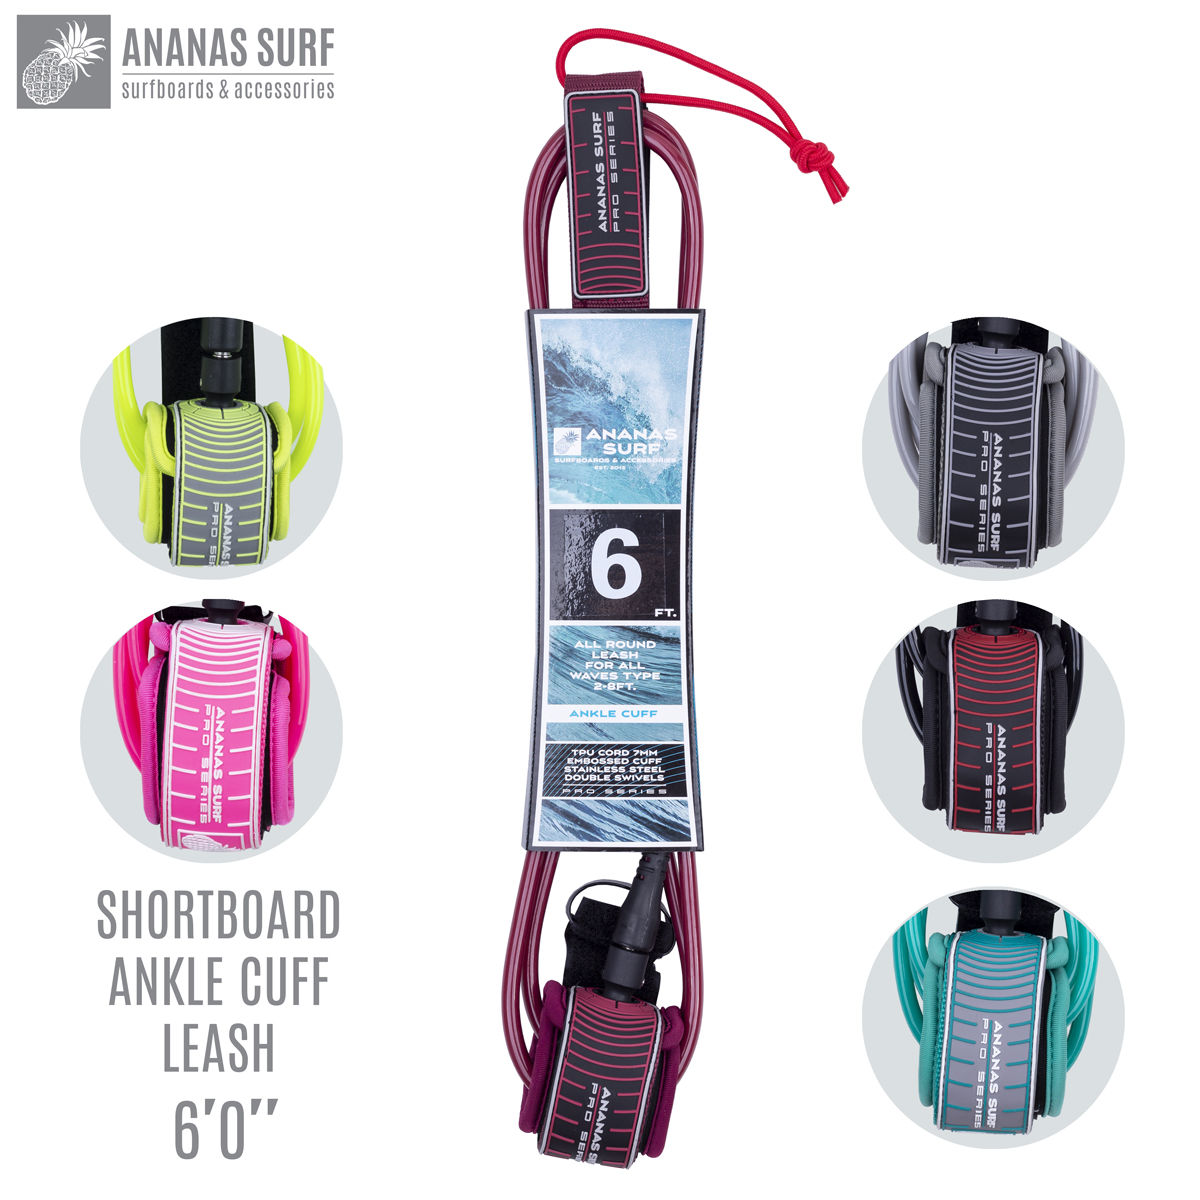 ananas surf surfboard safety leash leg rope pro series collection